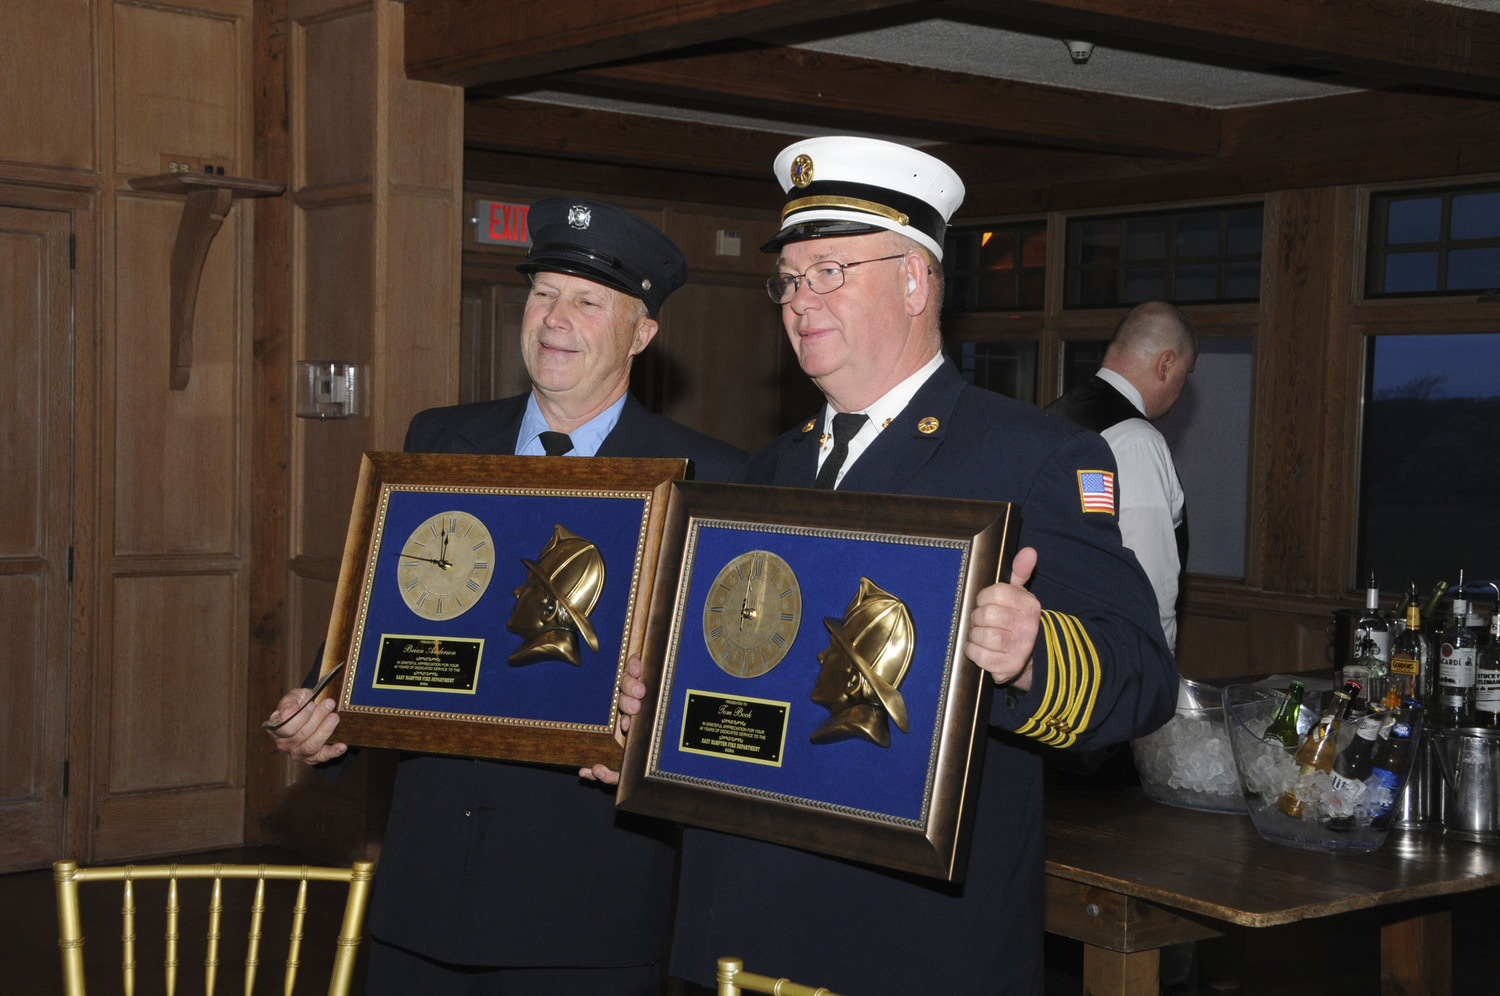 Thomas Bock and Brian Anderson, 40 Year members at the East Hampton Fire Department's 125th Annual Inspection Dinner at the Maidstone Club on Saturday.  RICHARD LEWIN